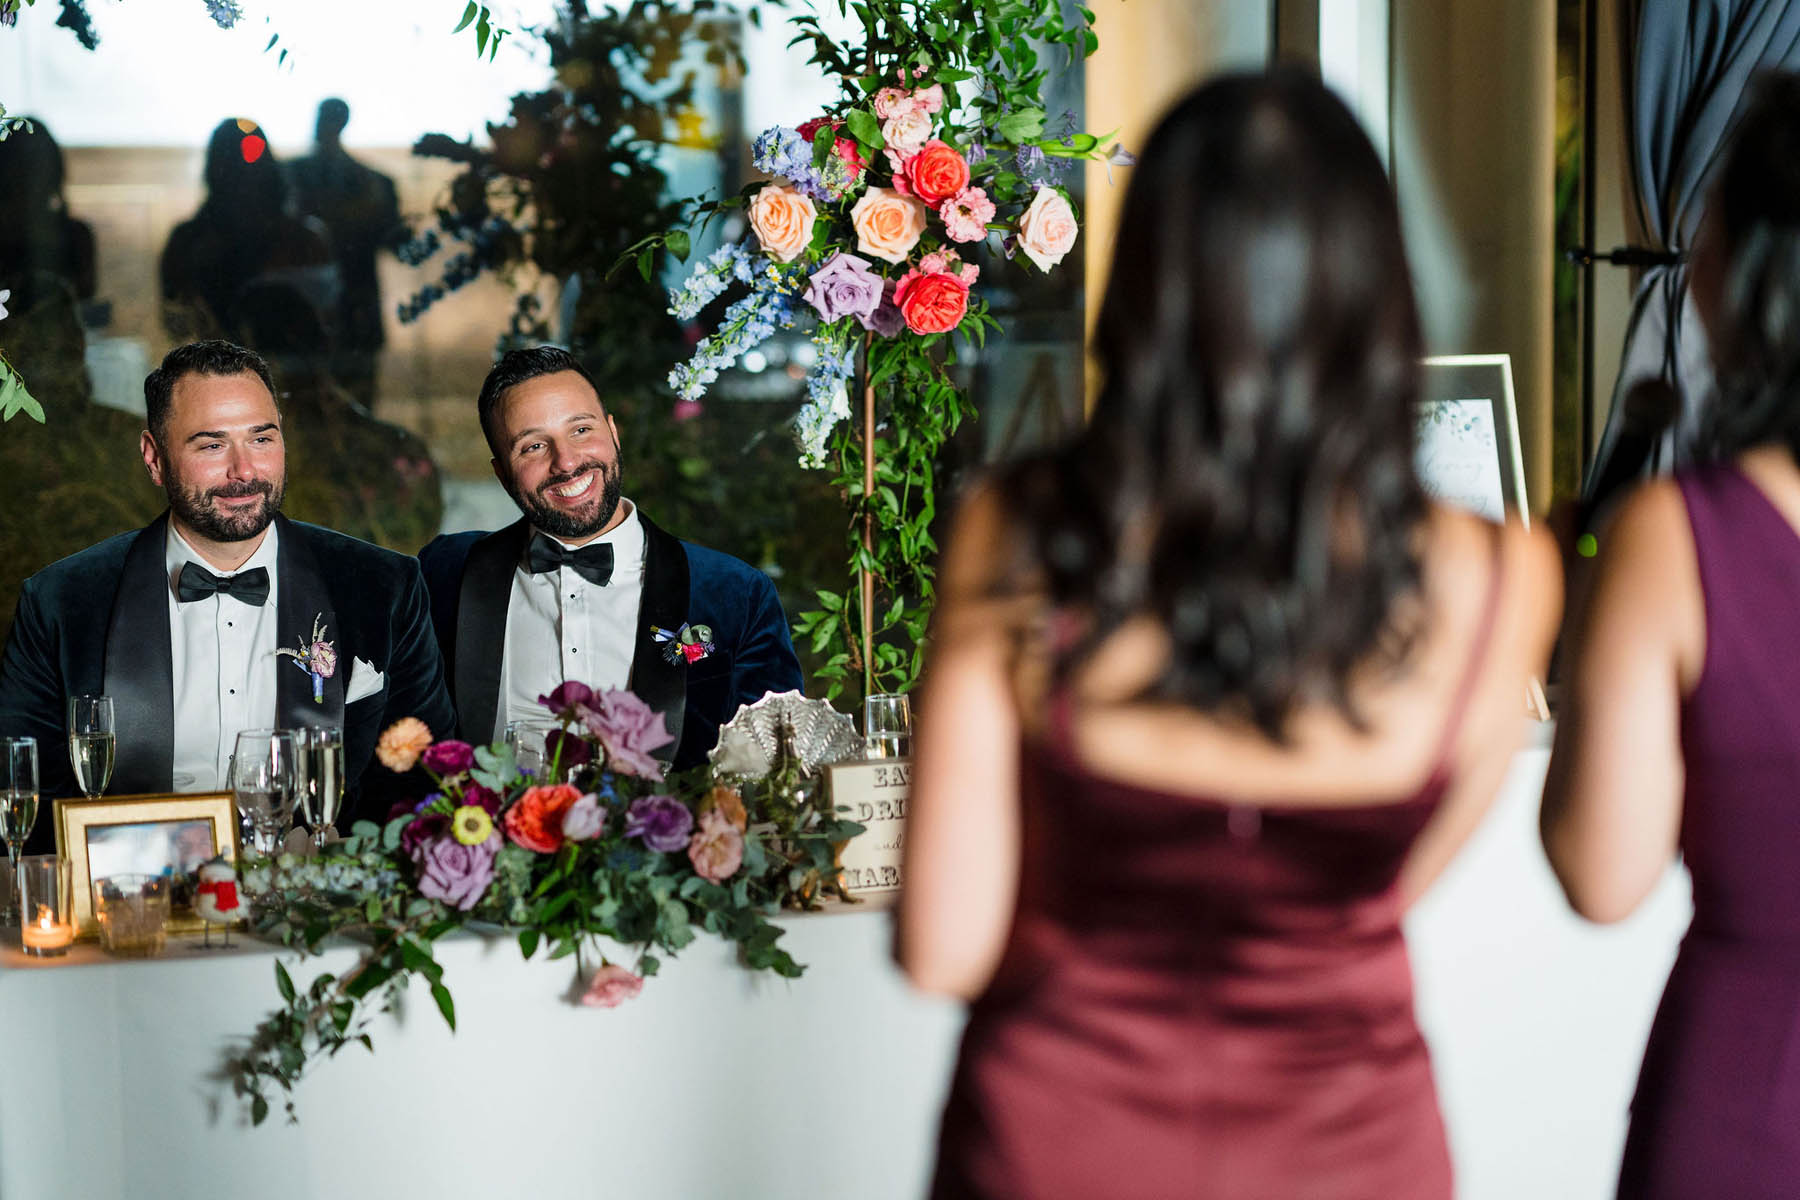 The grooms sit at a sweetheart table with floral decor as two people in burgundy dresses give a speech.